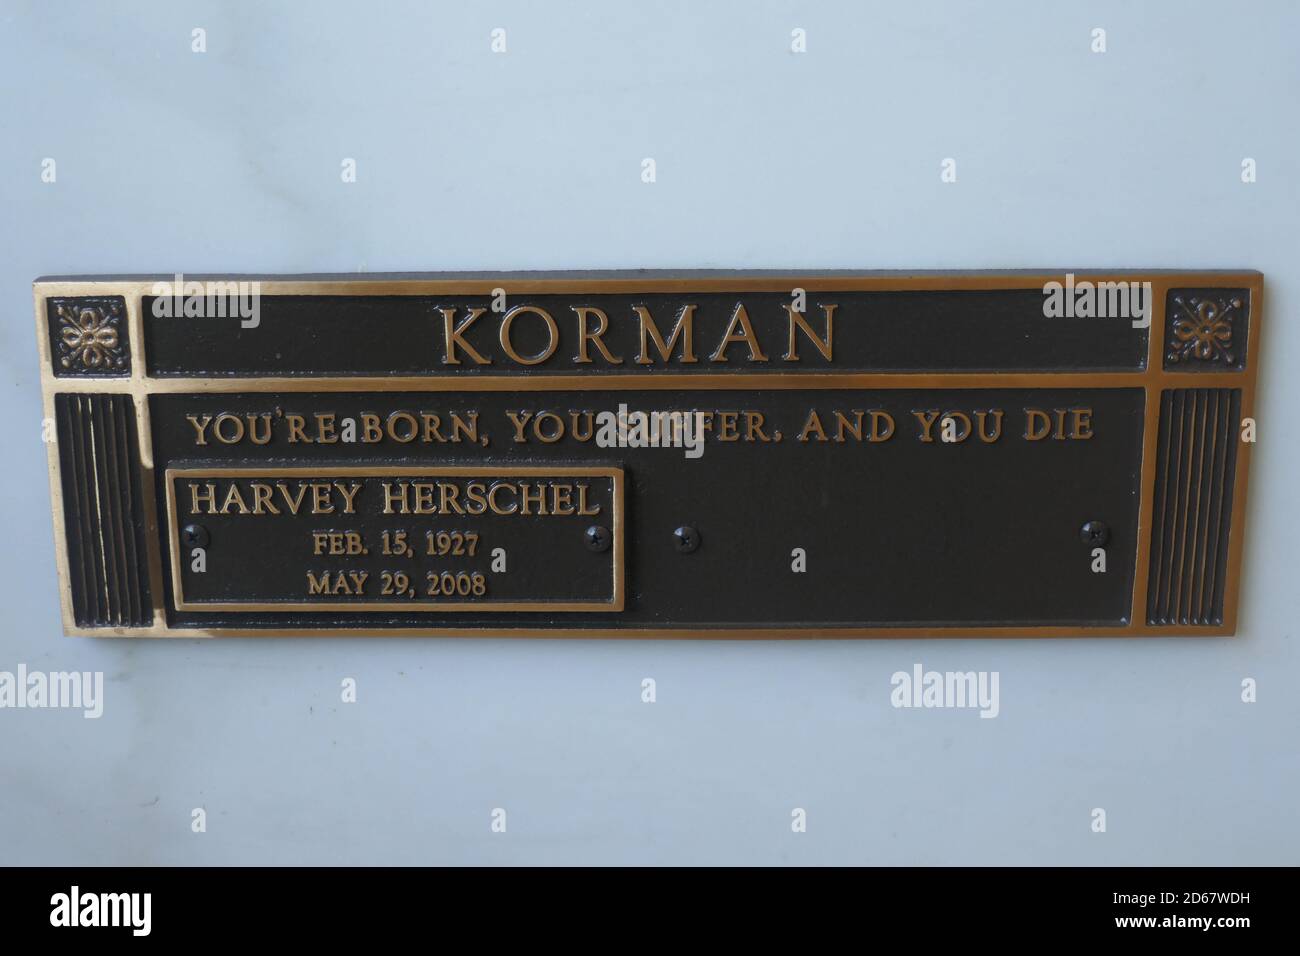 Santa Monica, California, USA 14th October 2020 A general view of atmosphere of actor Harvey Korman's grave in Mausoleum at Woodlawn Cemetery on October 14, 2020  in Santa Monica, California, USA. Photo by Barry King/Alamy Stock Photo Stock Photo